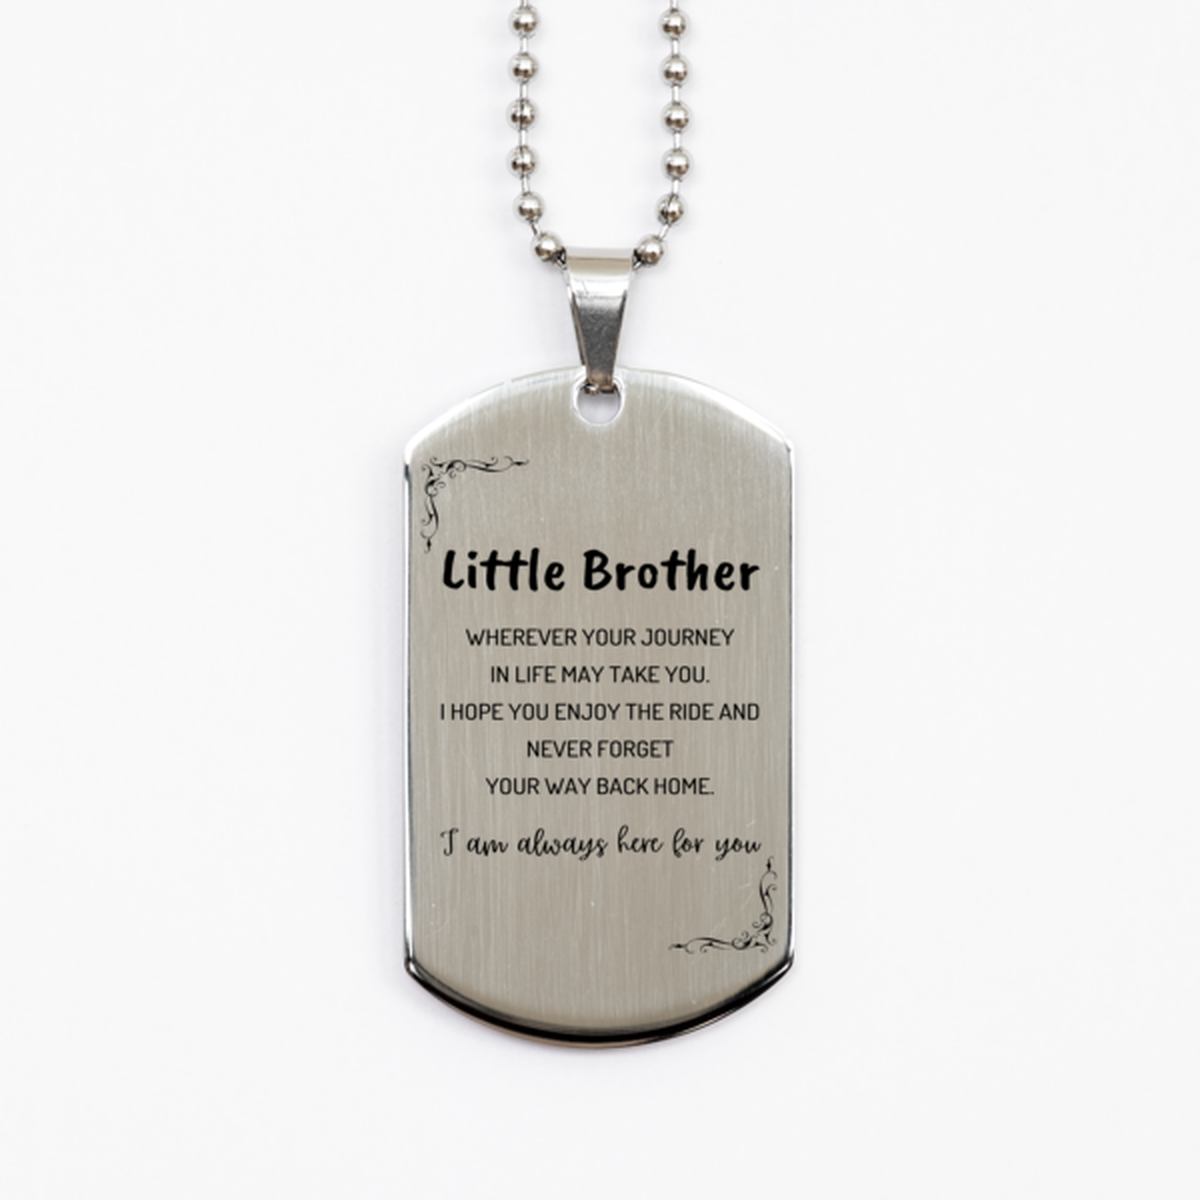 Little Brother wherever your journey in life may take you, I am always here for you Little Brother Silver Dog Tag, Awesome Christmas Gifts For Little Brother, Little Brother Birthday Gifts for Men Women Family Loved One